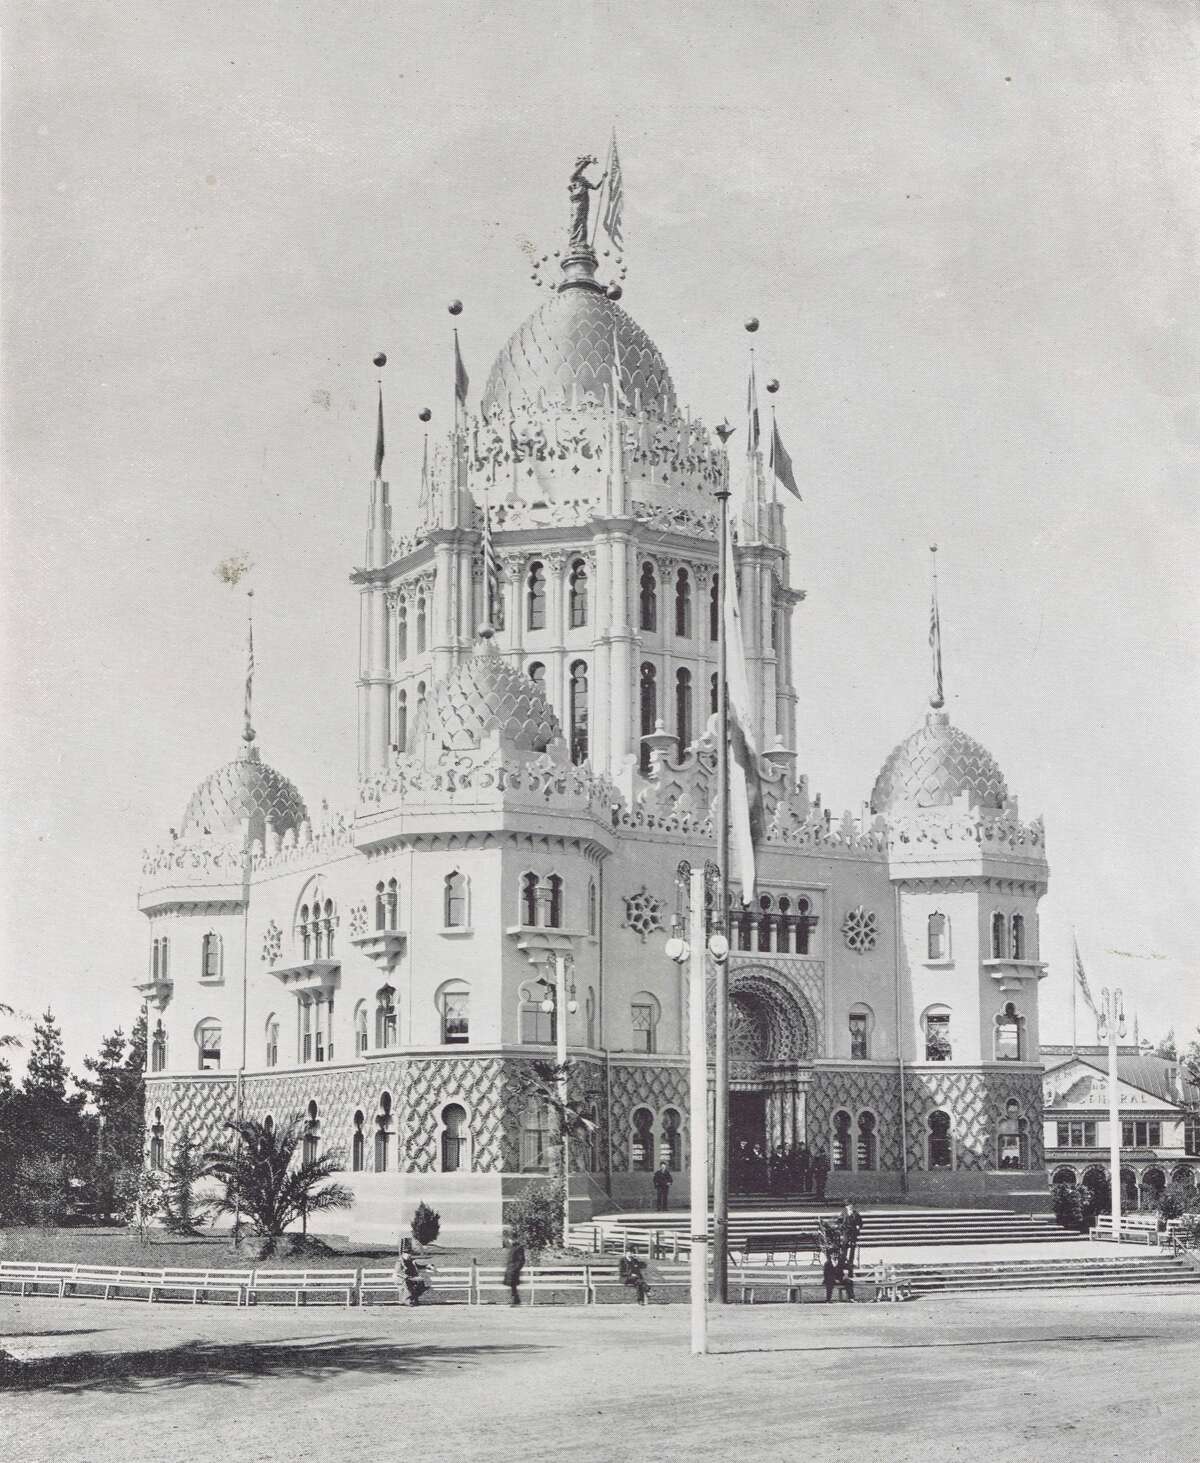 The Administration Building - Created in East Indian style architecture. Built of wood and fireproof staff at only a cost of $31,000. It contained press and telegraph departments, housing for executives and financial offices. The San Francisco Midwinter Fair of 1894, in Golden Gate Park, from the collection of Bob Bragman